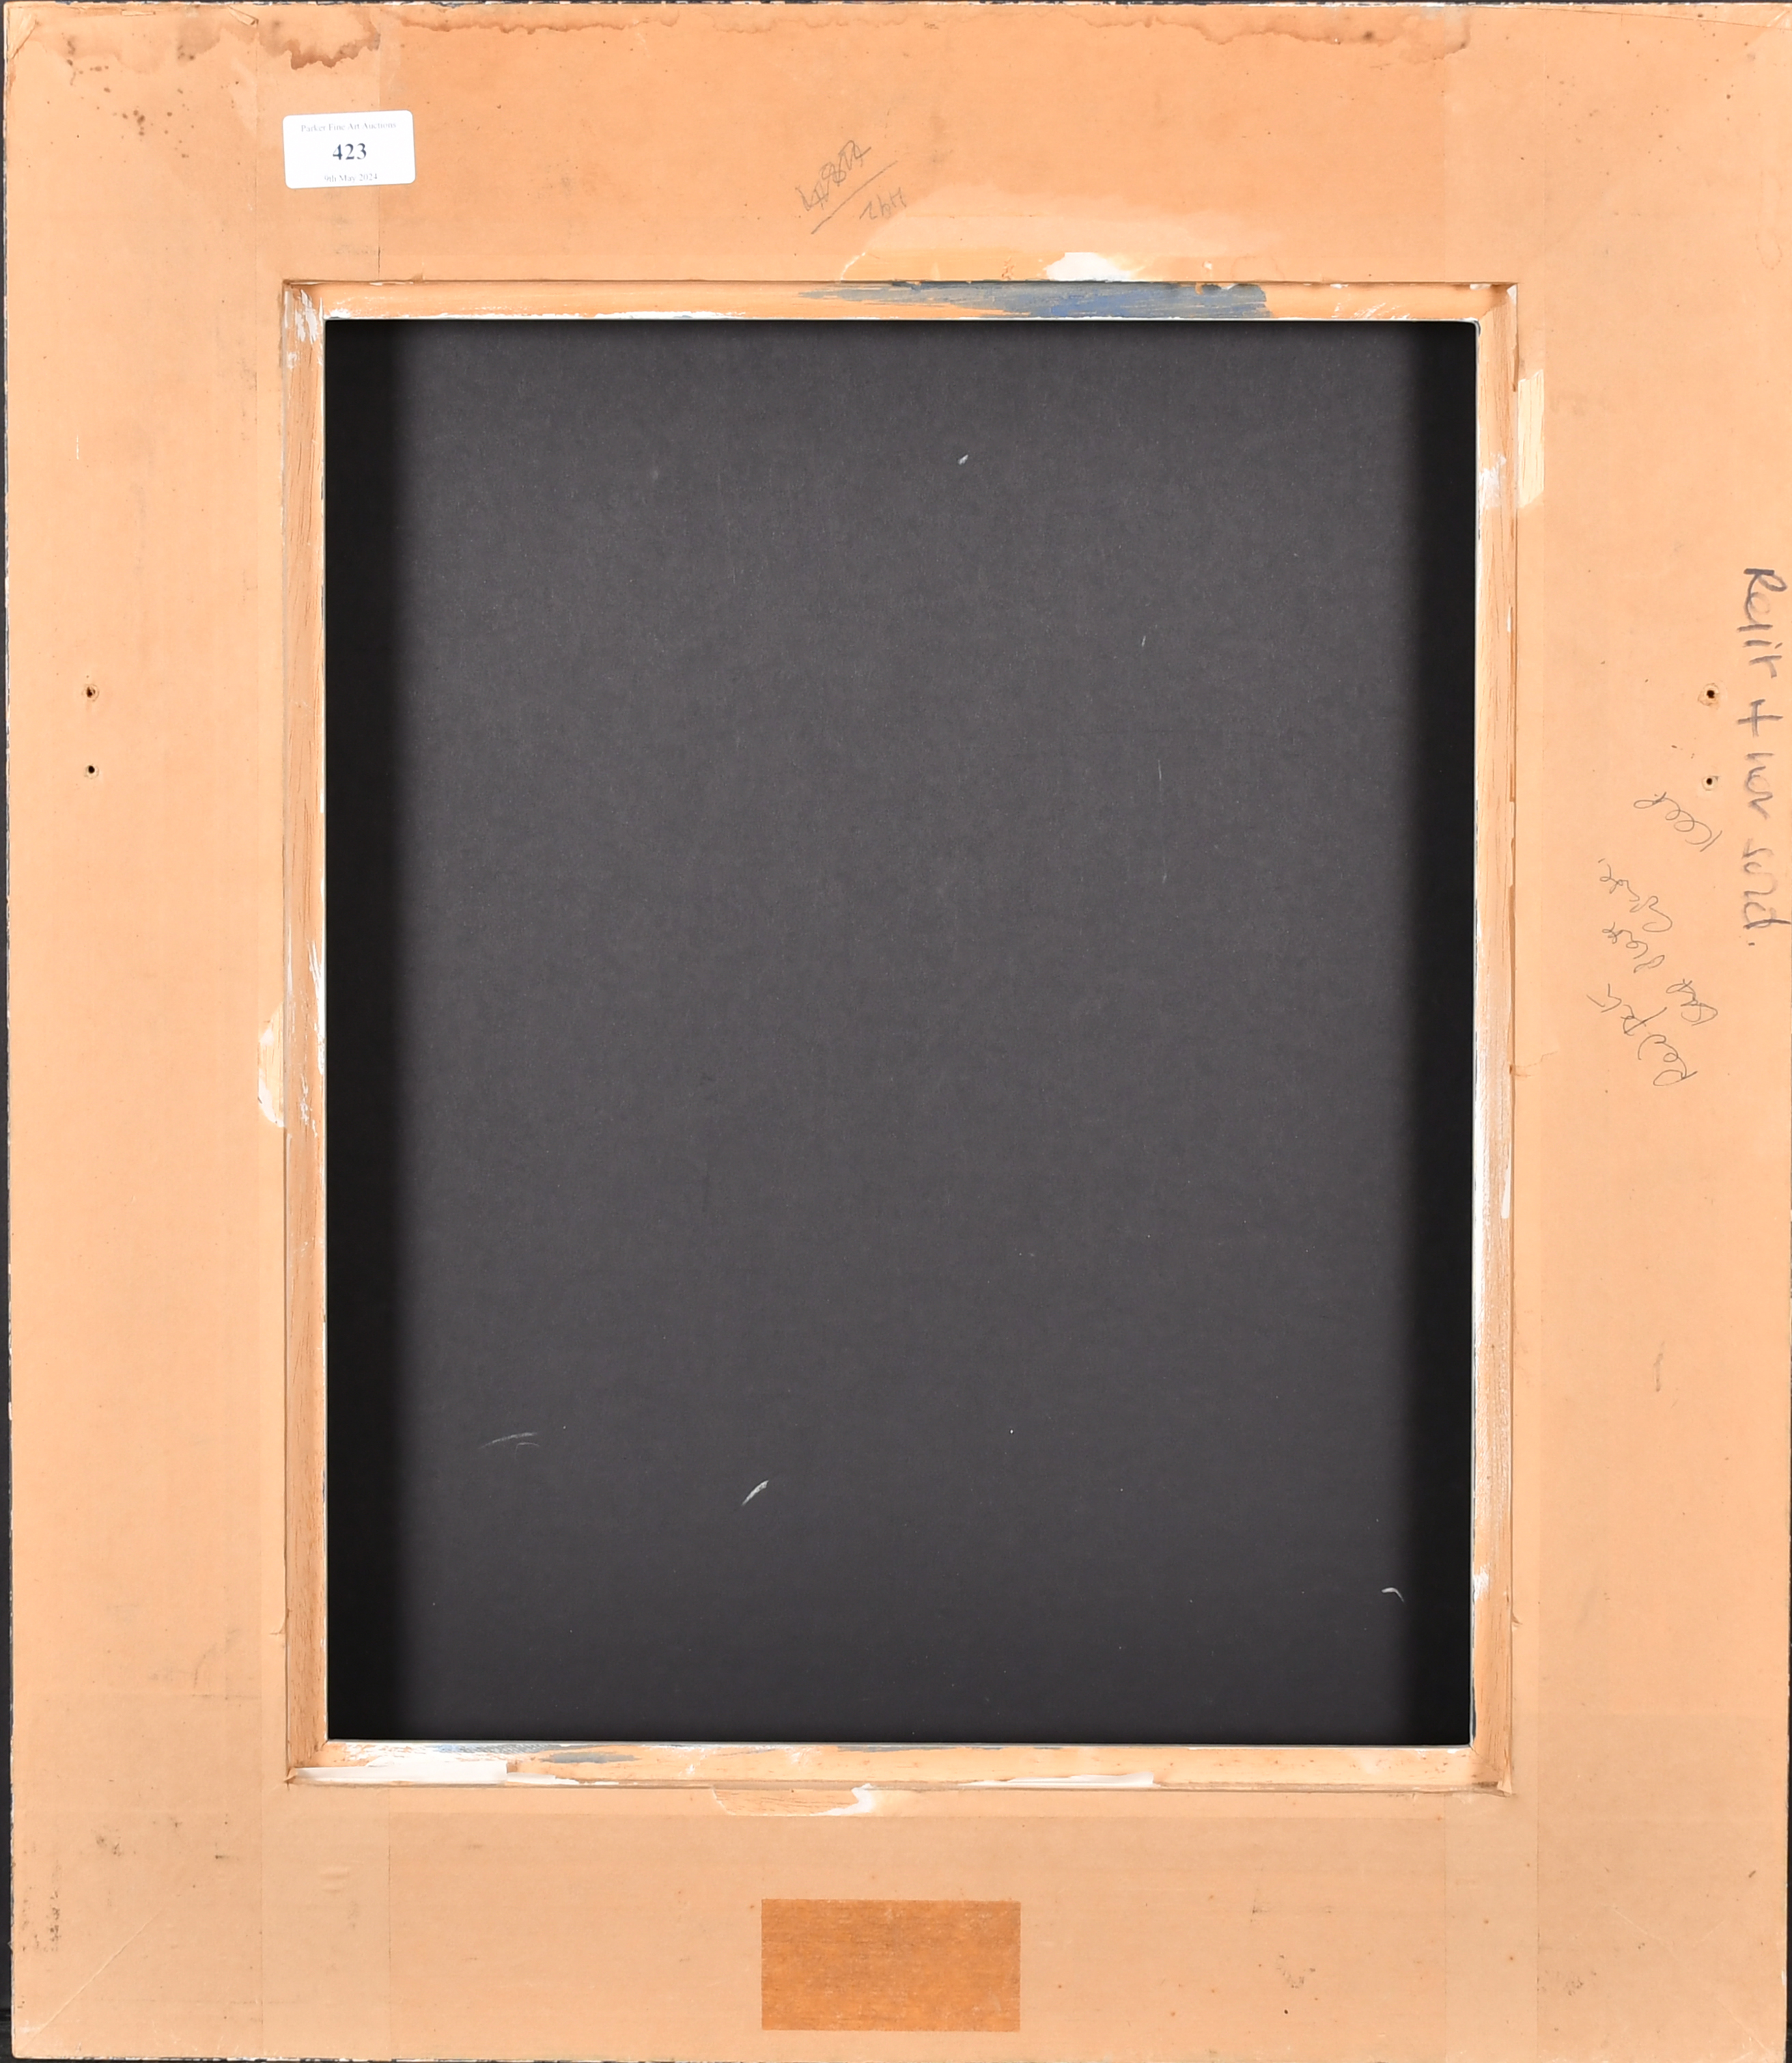 20th Century English School. A Hollow Painted Frame, rebate 17.25" x 14" (43.8 x 35.5cm) - Image 3 of 3